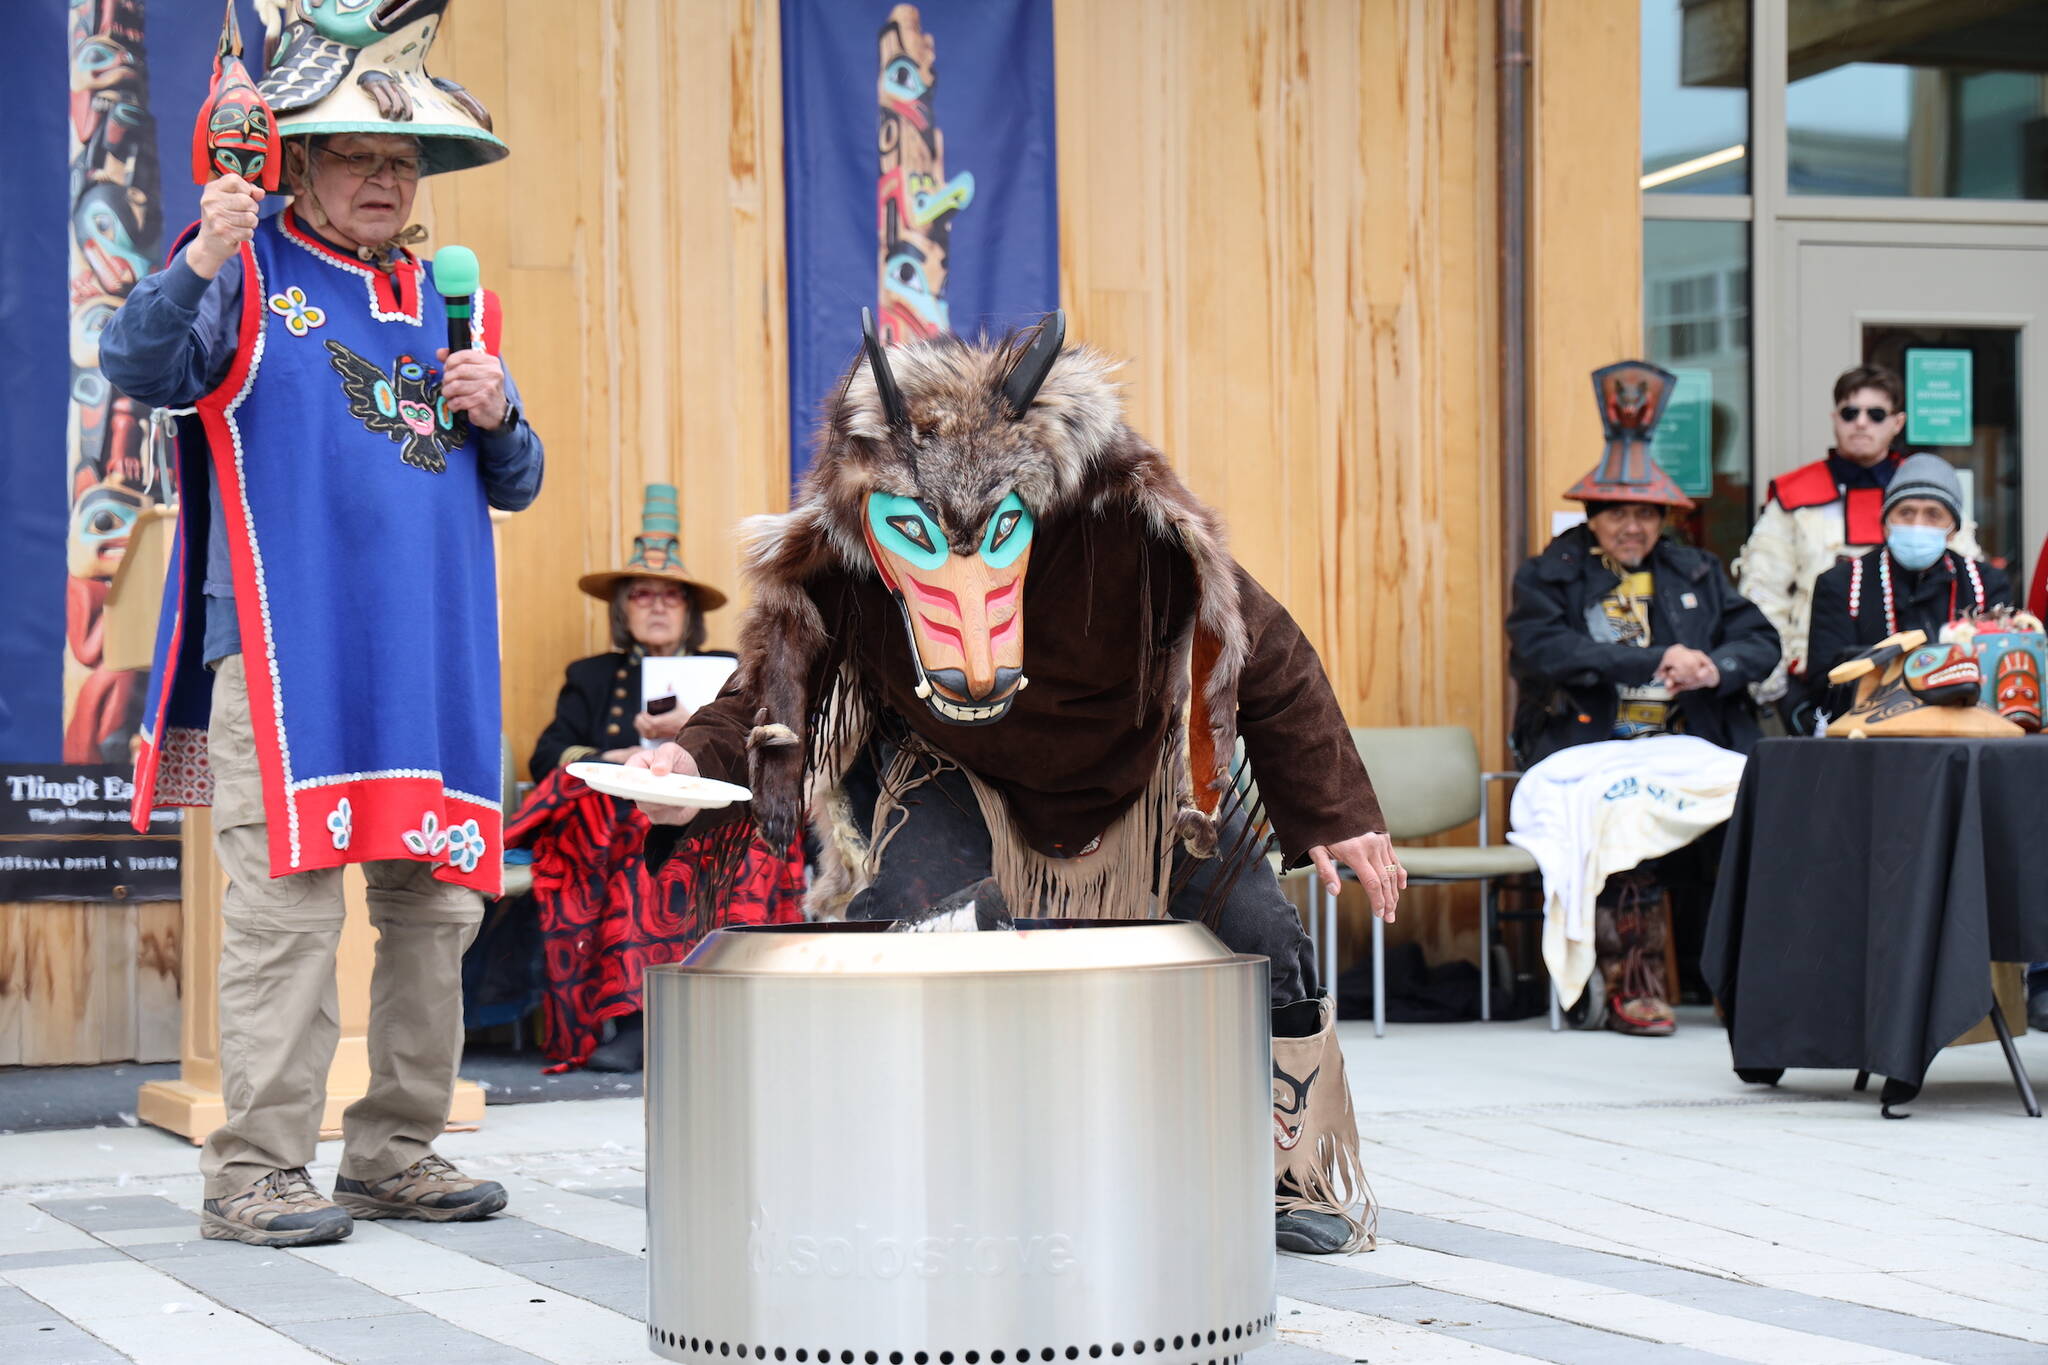 Kaax̱ḵaatuklag̱é Ken Grant sings a song as Ben Coronell performs a thanking and feeding the spirits of the trees ceremony during the dedication ceremony of the Kootéeyaa Deiyí, Totem Pole Trail, held Saturday in downtown Juneau at Heritage Plaza. (Clarise Larson / Juneau Empire)